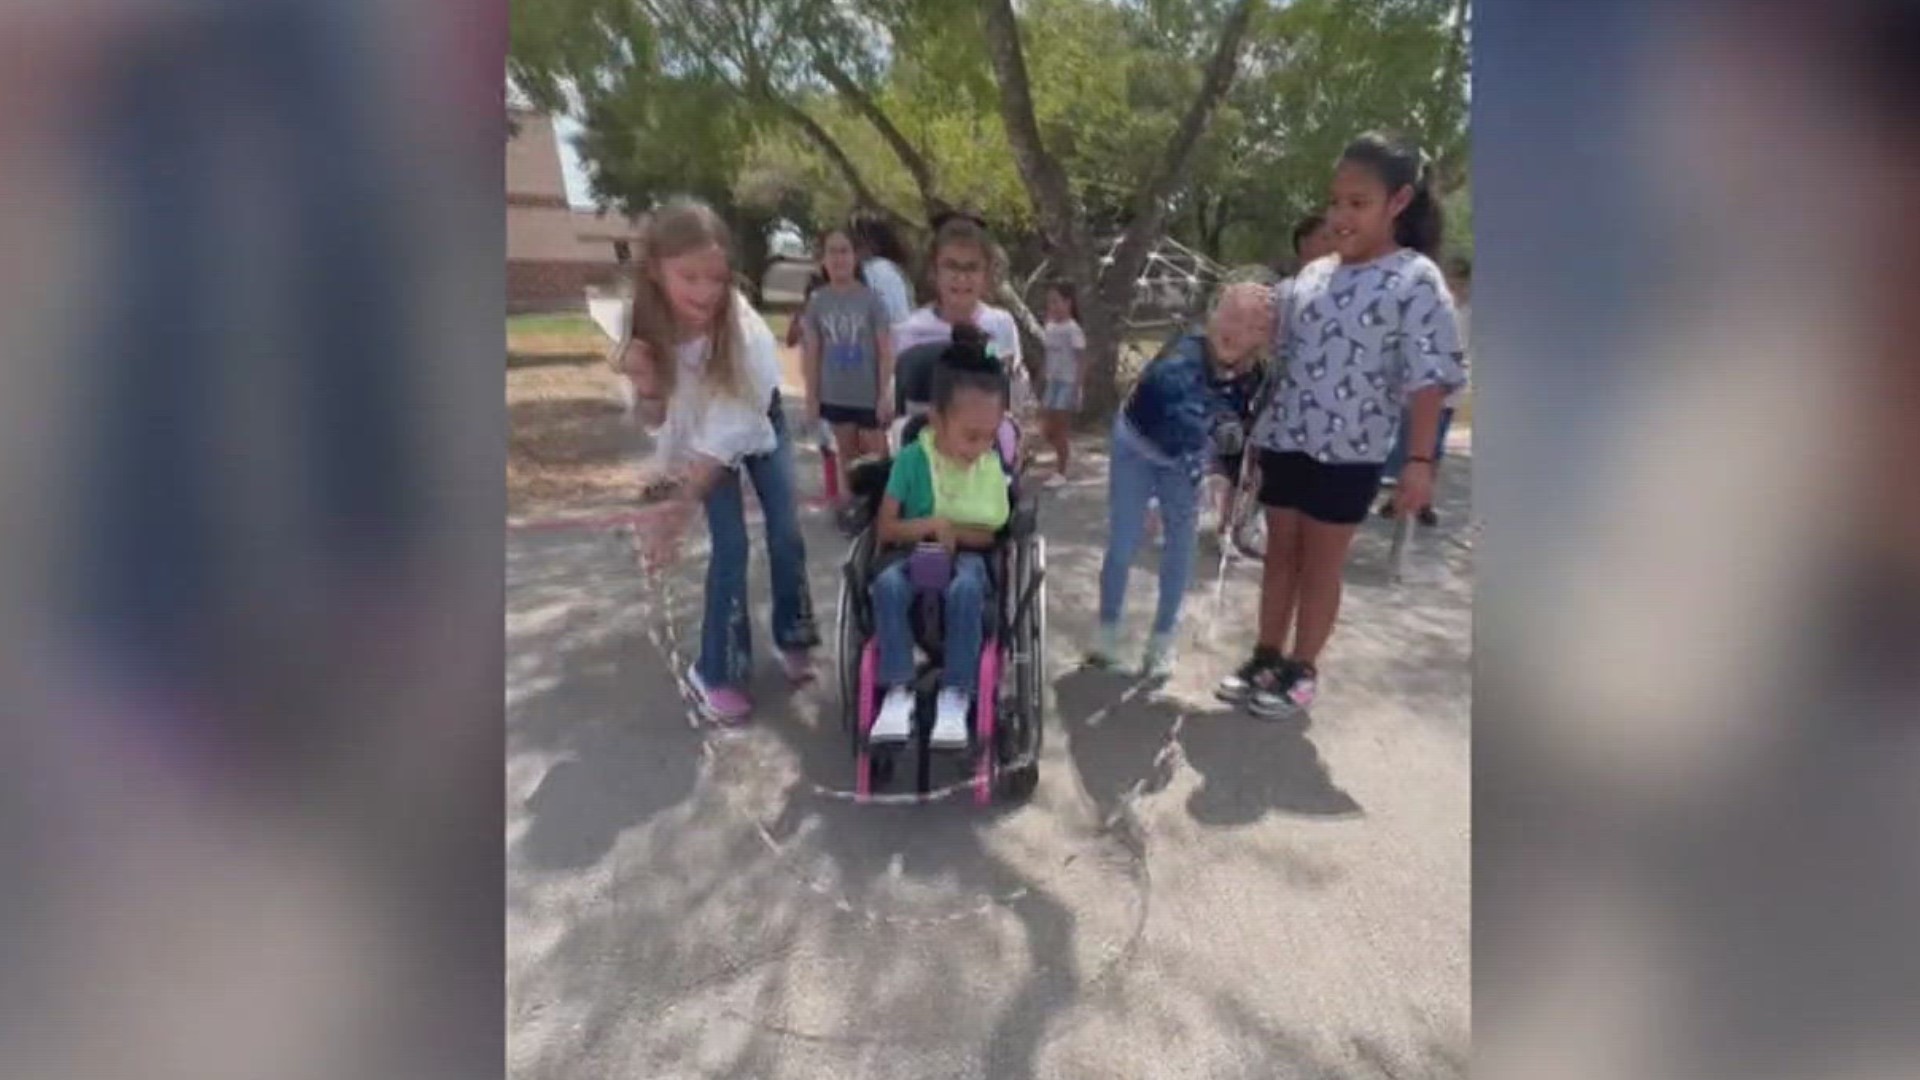 A rare genetic disorder left Bryleigh Silvas unable to play like other 8-year-old girls, but her classmates find ways to make sure she has fun, too.